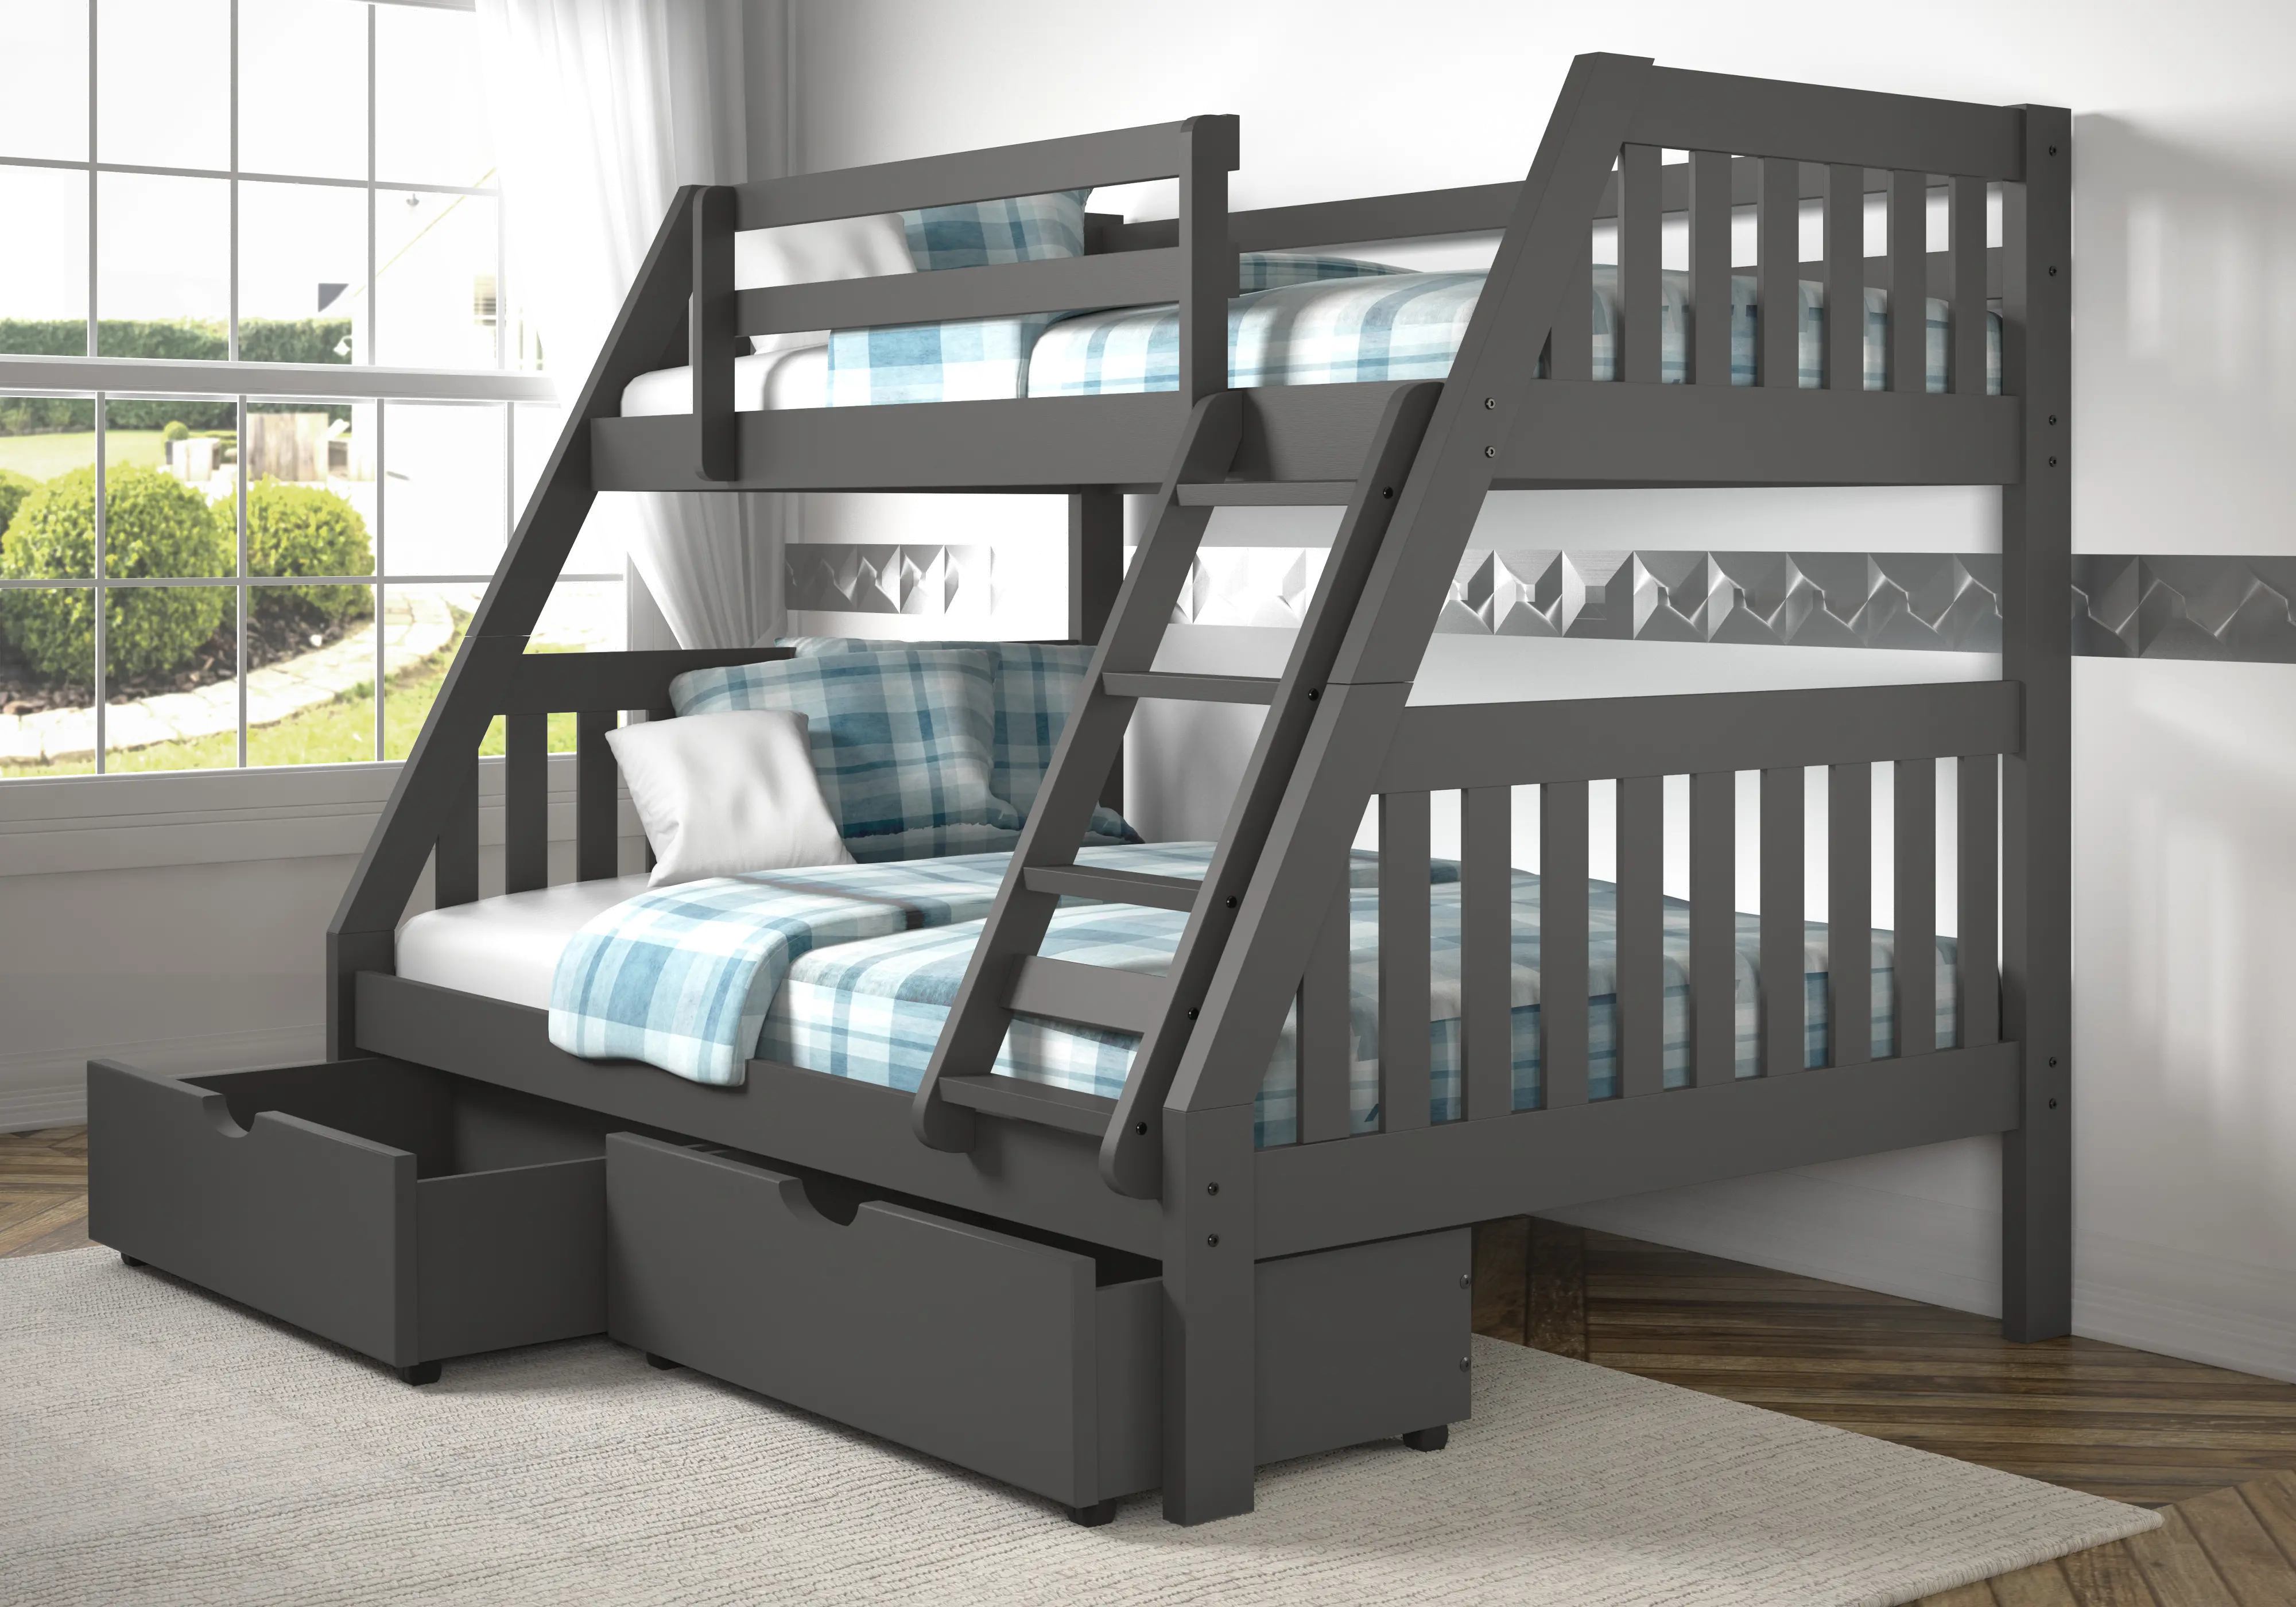 1018-3TFDG505-DG Gray Twin over Full Bunk Bed with Storage Drawers  sku 1018-3TFDG505-DG